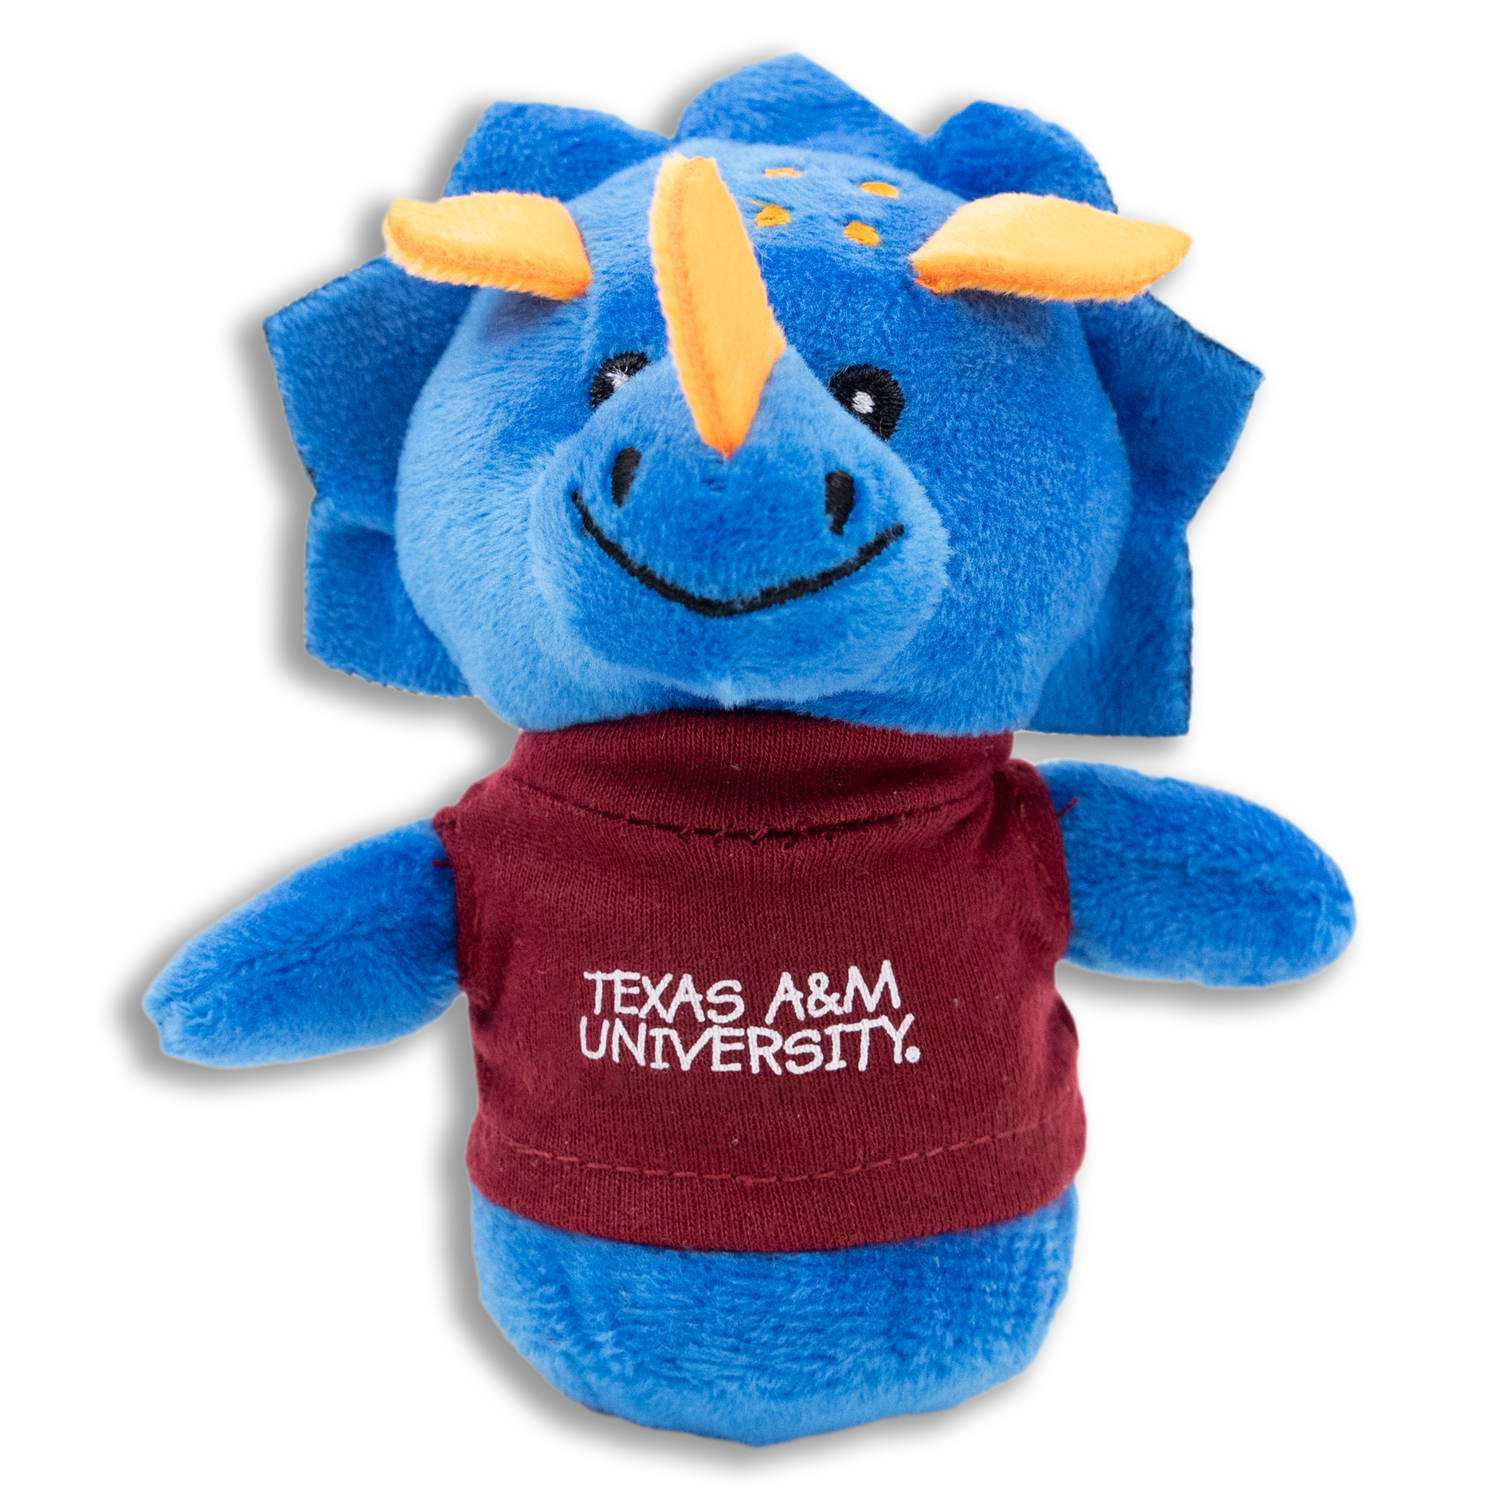 Texas A&M University Blue Triceratops Shorties Plush Toy